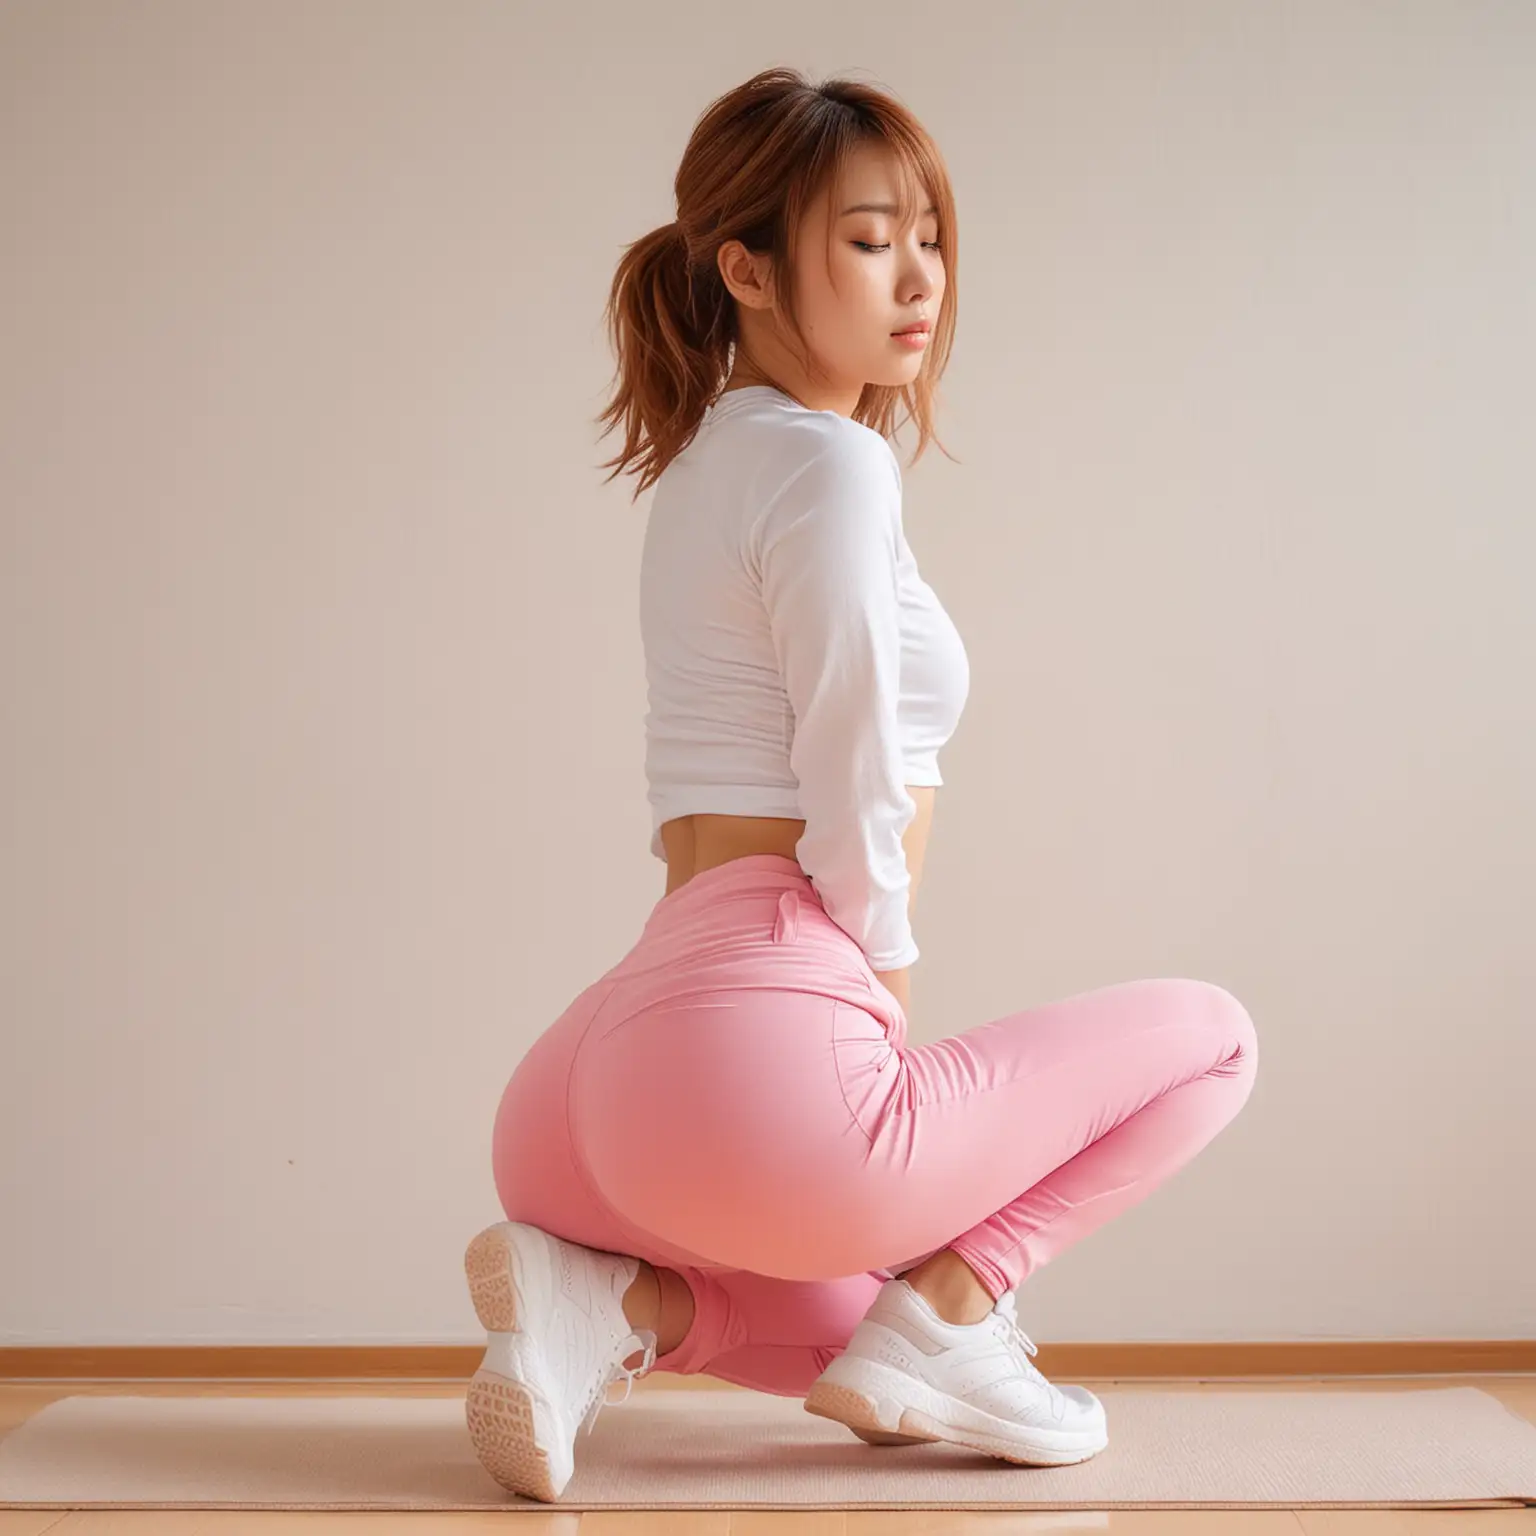 Japanese Girl in White Top and Pink Yoga Pants Showing Booty